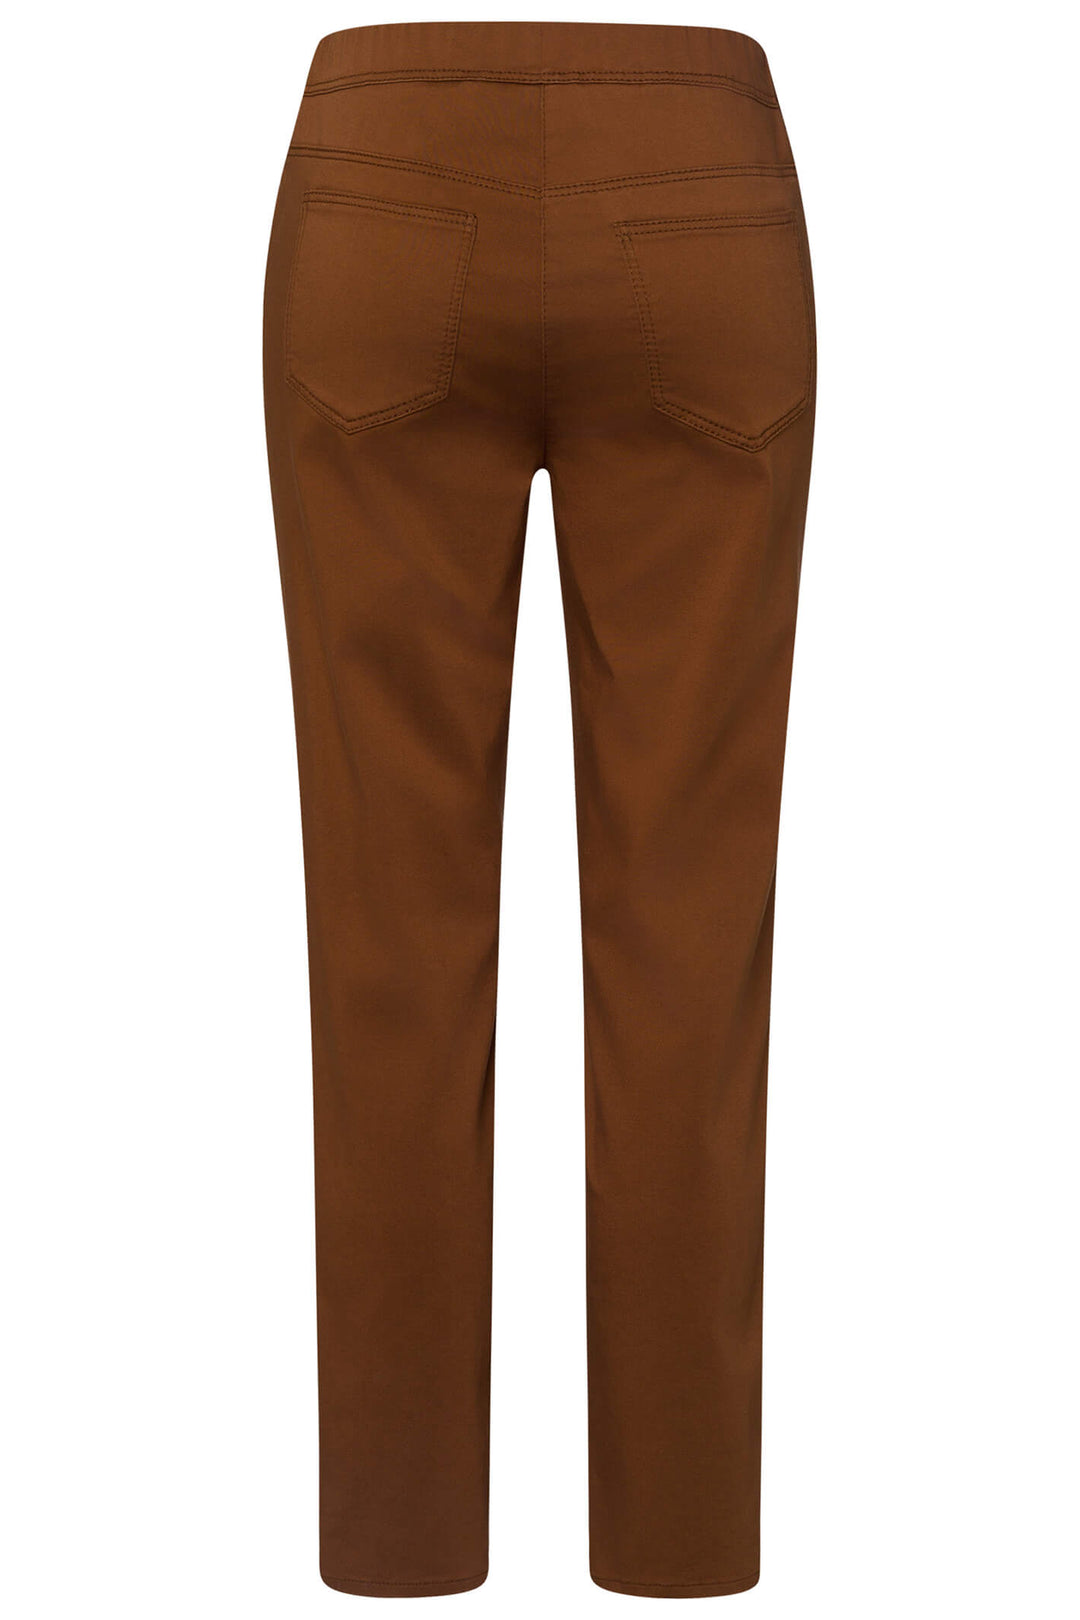 Frank Walder Mia 621601 000 879 Brown Pull-On Trousers - Shirley Allum Boutique